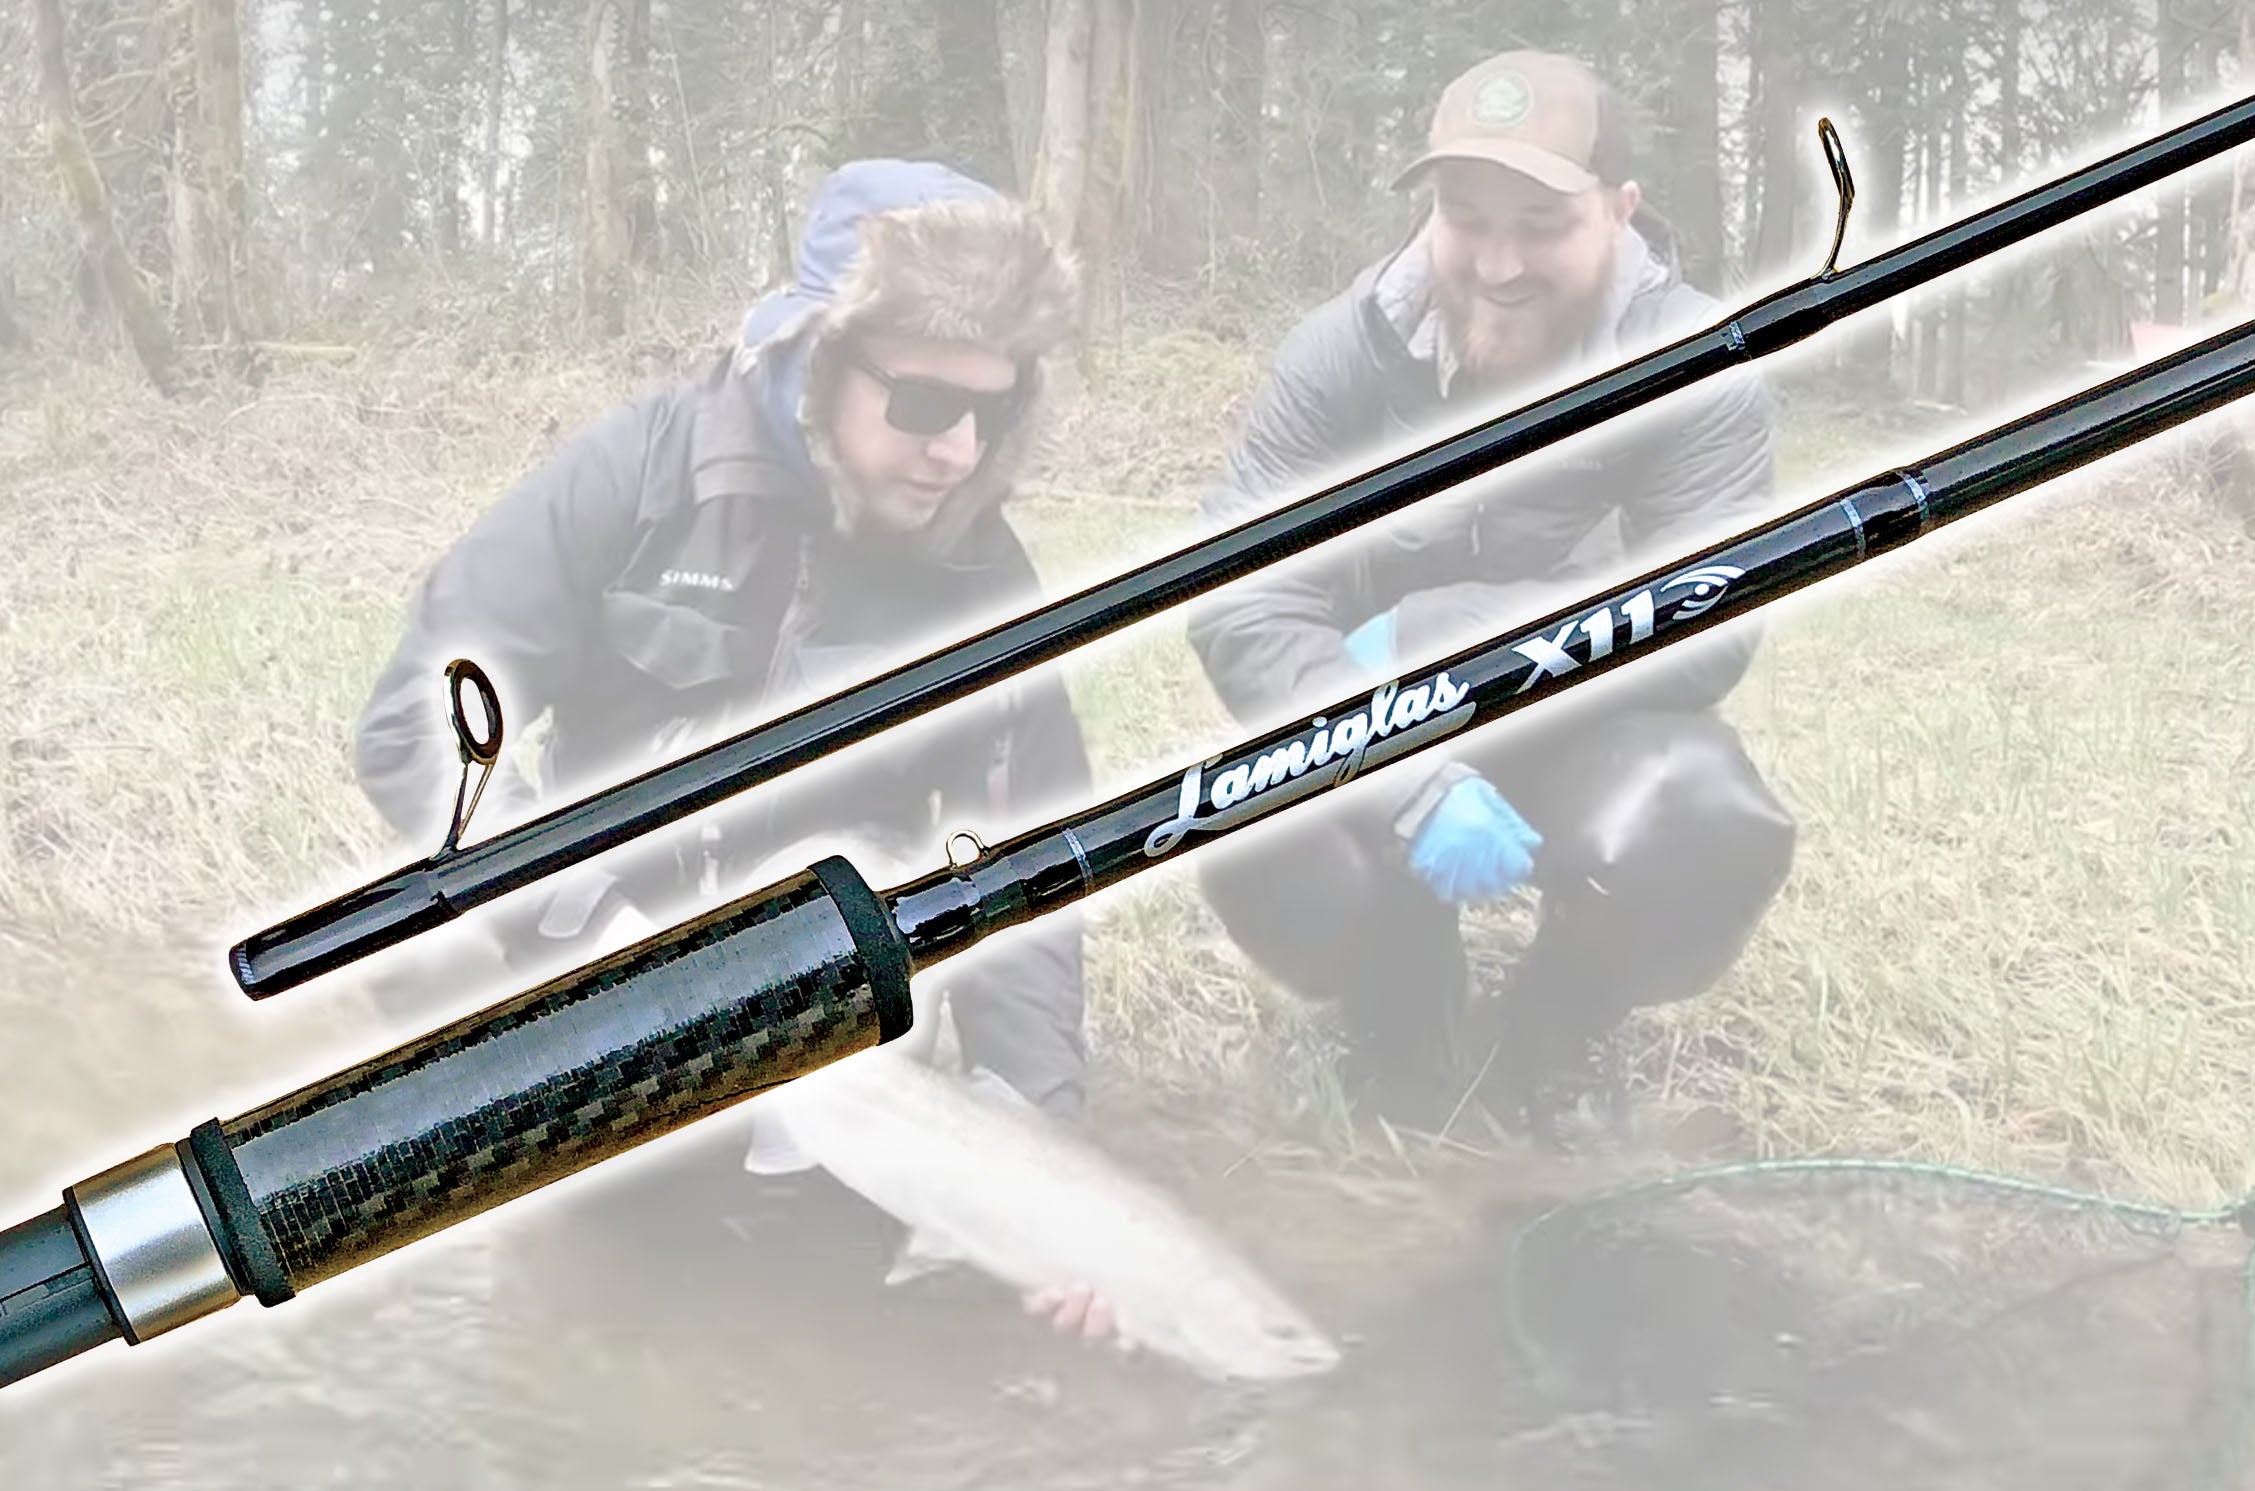 Lamiglas X11 10' 6 Float Rod - PLUS a FREE 2-year subscription to STS